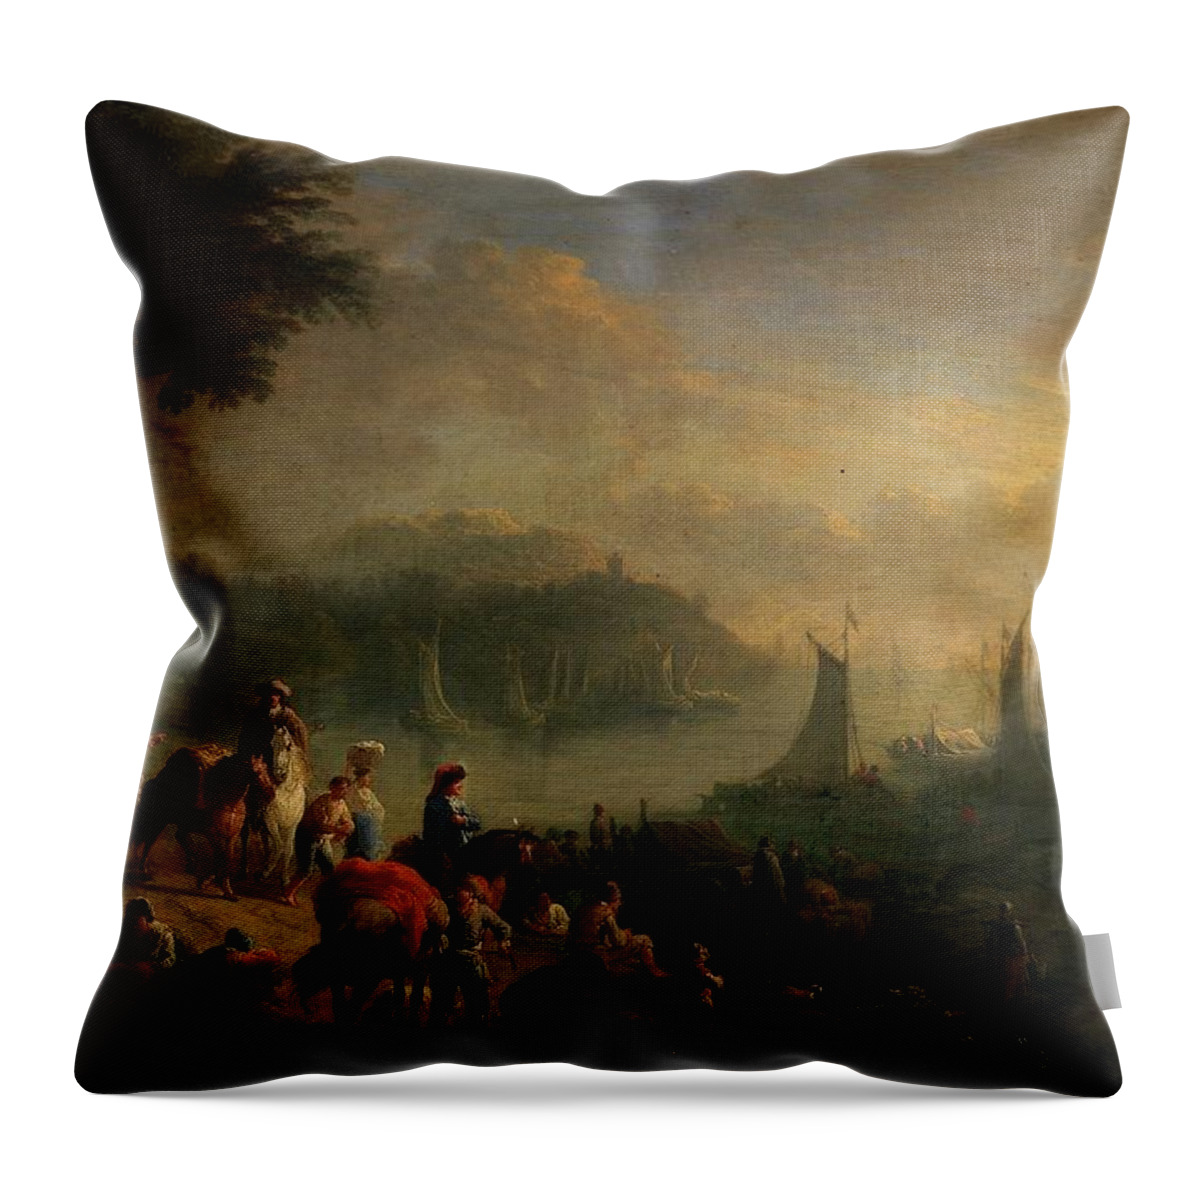 A Port Throw Pillow featuring the painting 'A Port', Second half 17th century - Early 18th century, Flemish Scho... #1 by Adriaen Frans Boudewyns -1644-1711-